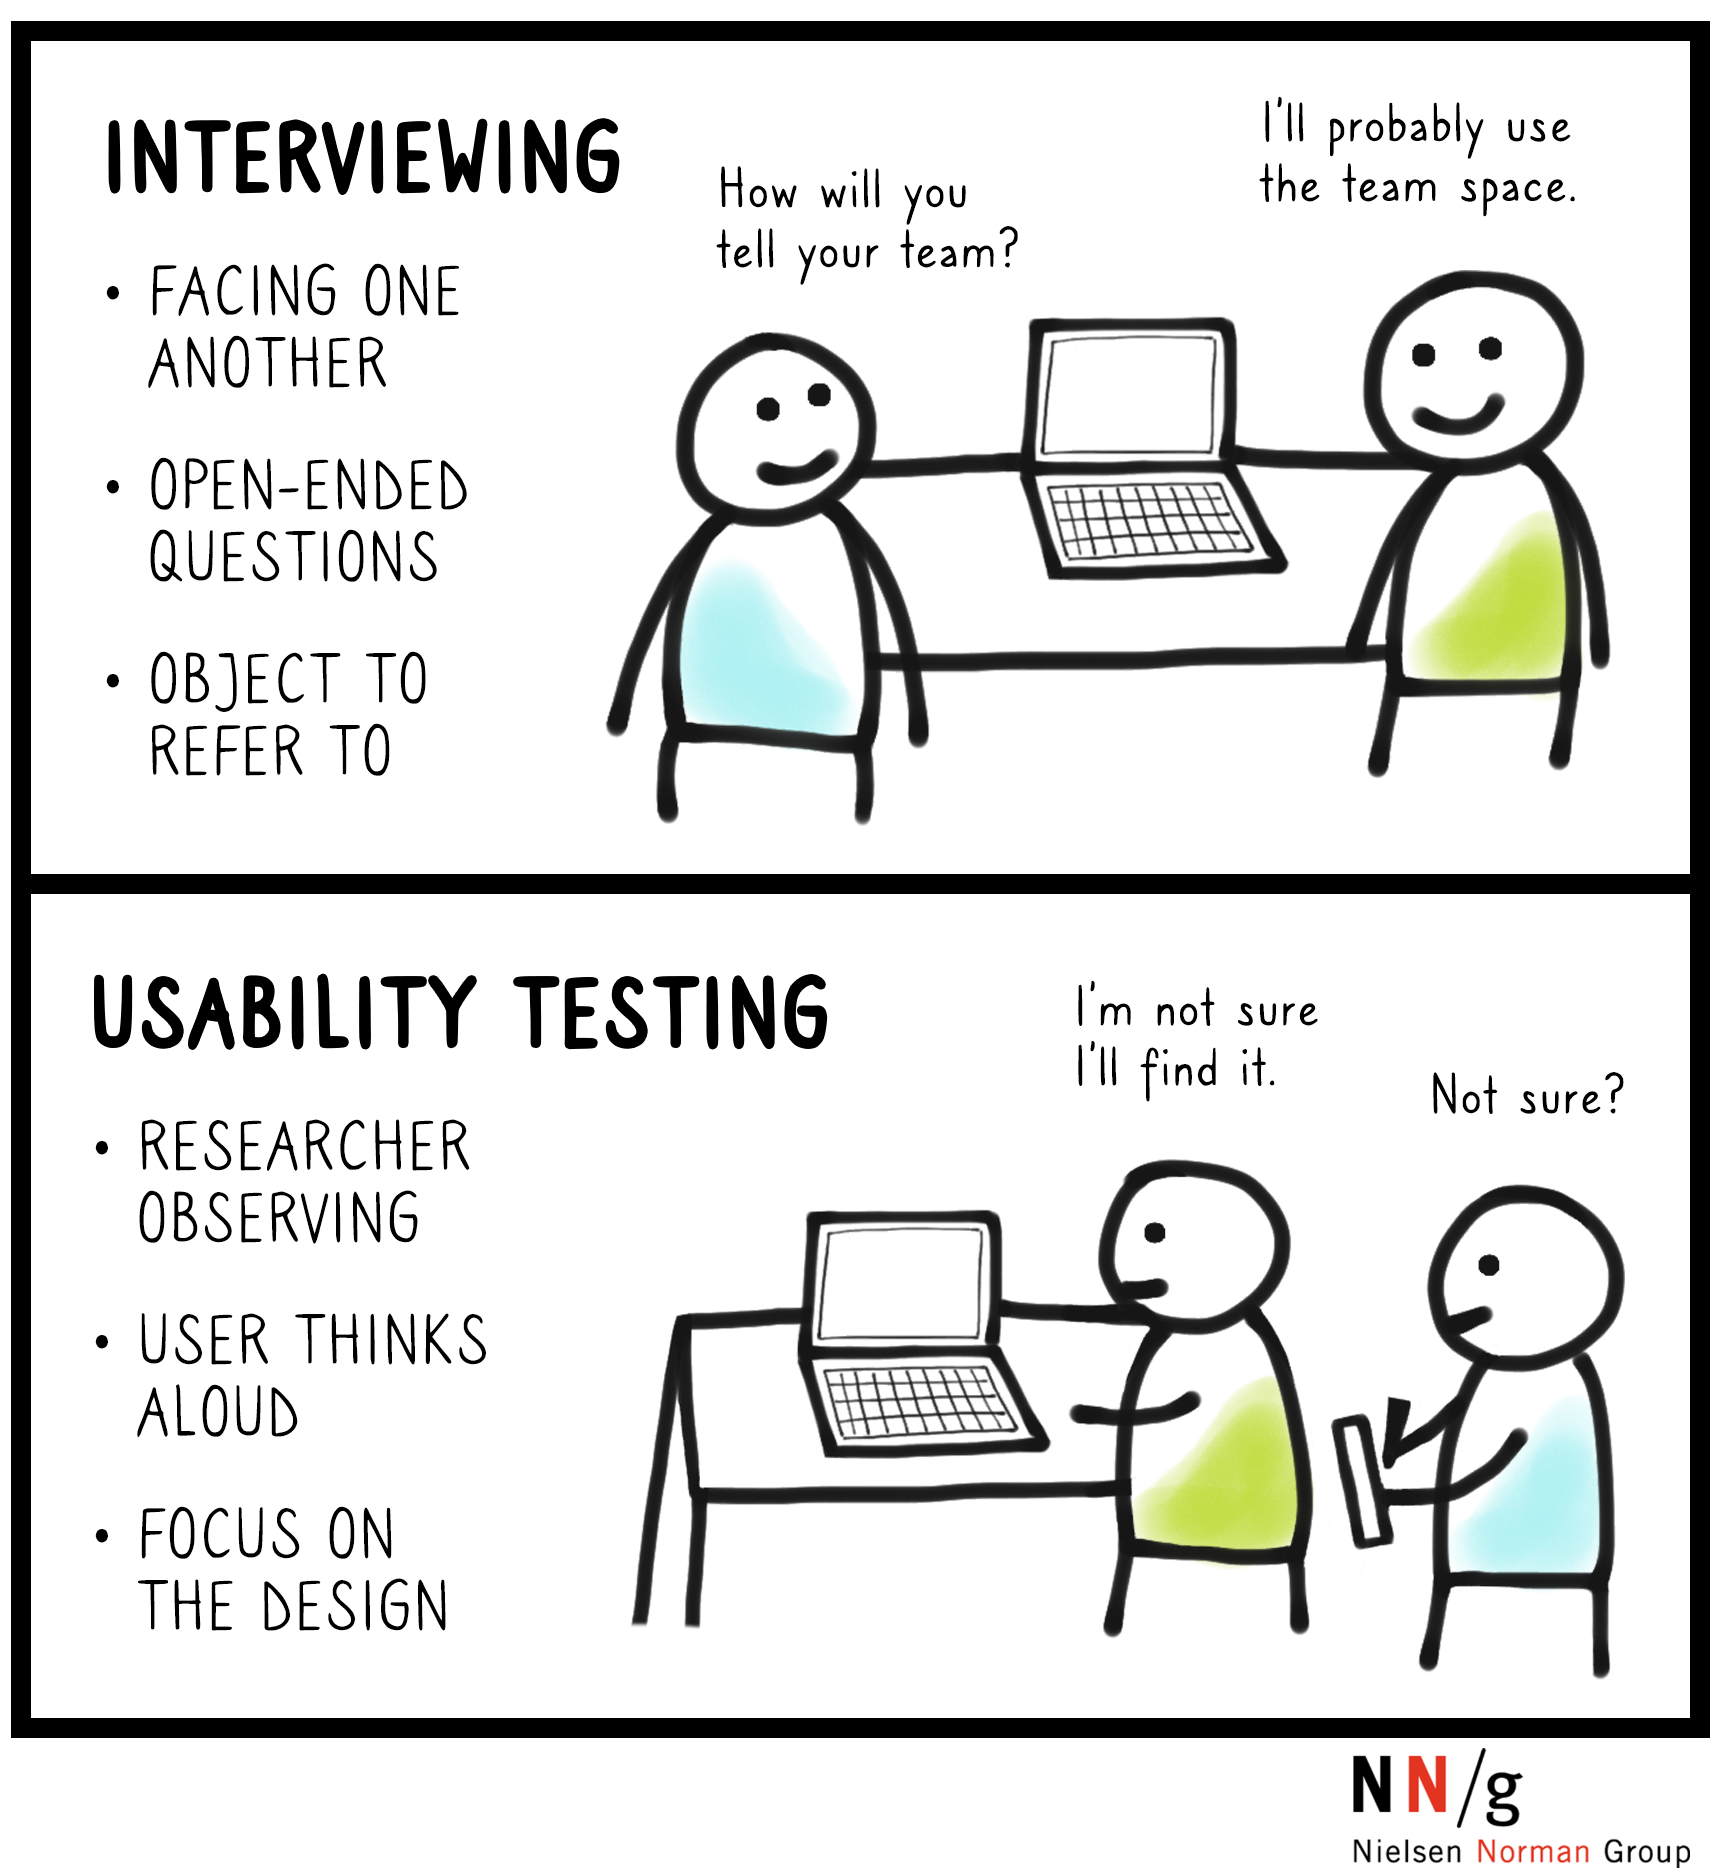 Panel 1, interview: interviewer and user are facing one another, asking onen-ended questions, and has a design to refer to. Panel 2, usability test: researcher is observing, user thinks aloud, focus on the design.